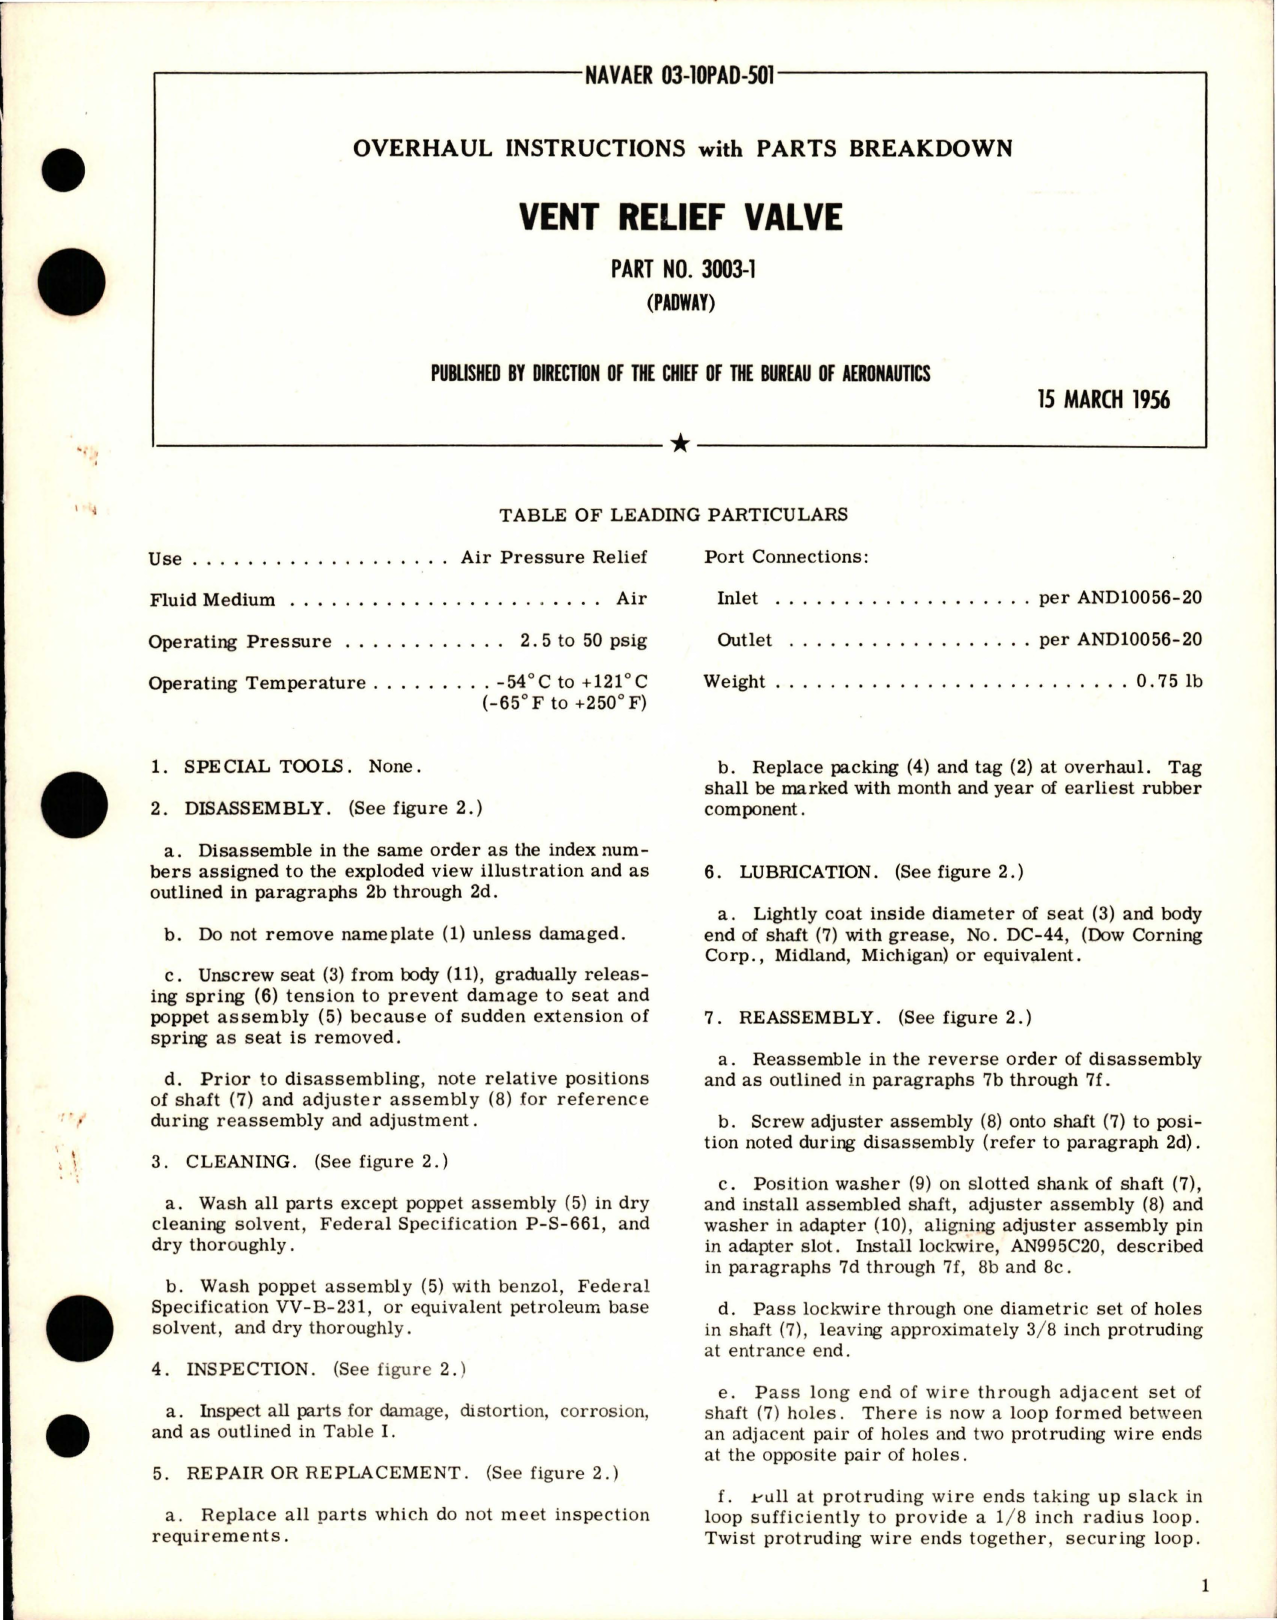 Sample page 1 from AirCorps Library document: Overhaul Instructions with Parts Breakdown for Vent Relief Valve - Part 3003-1